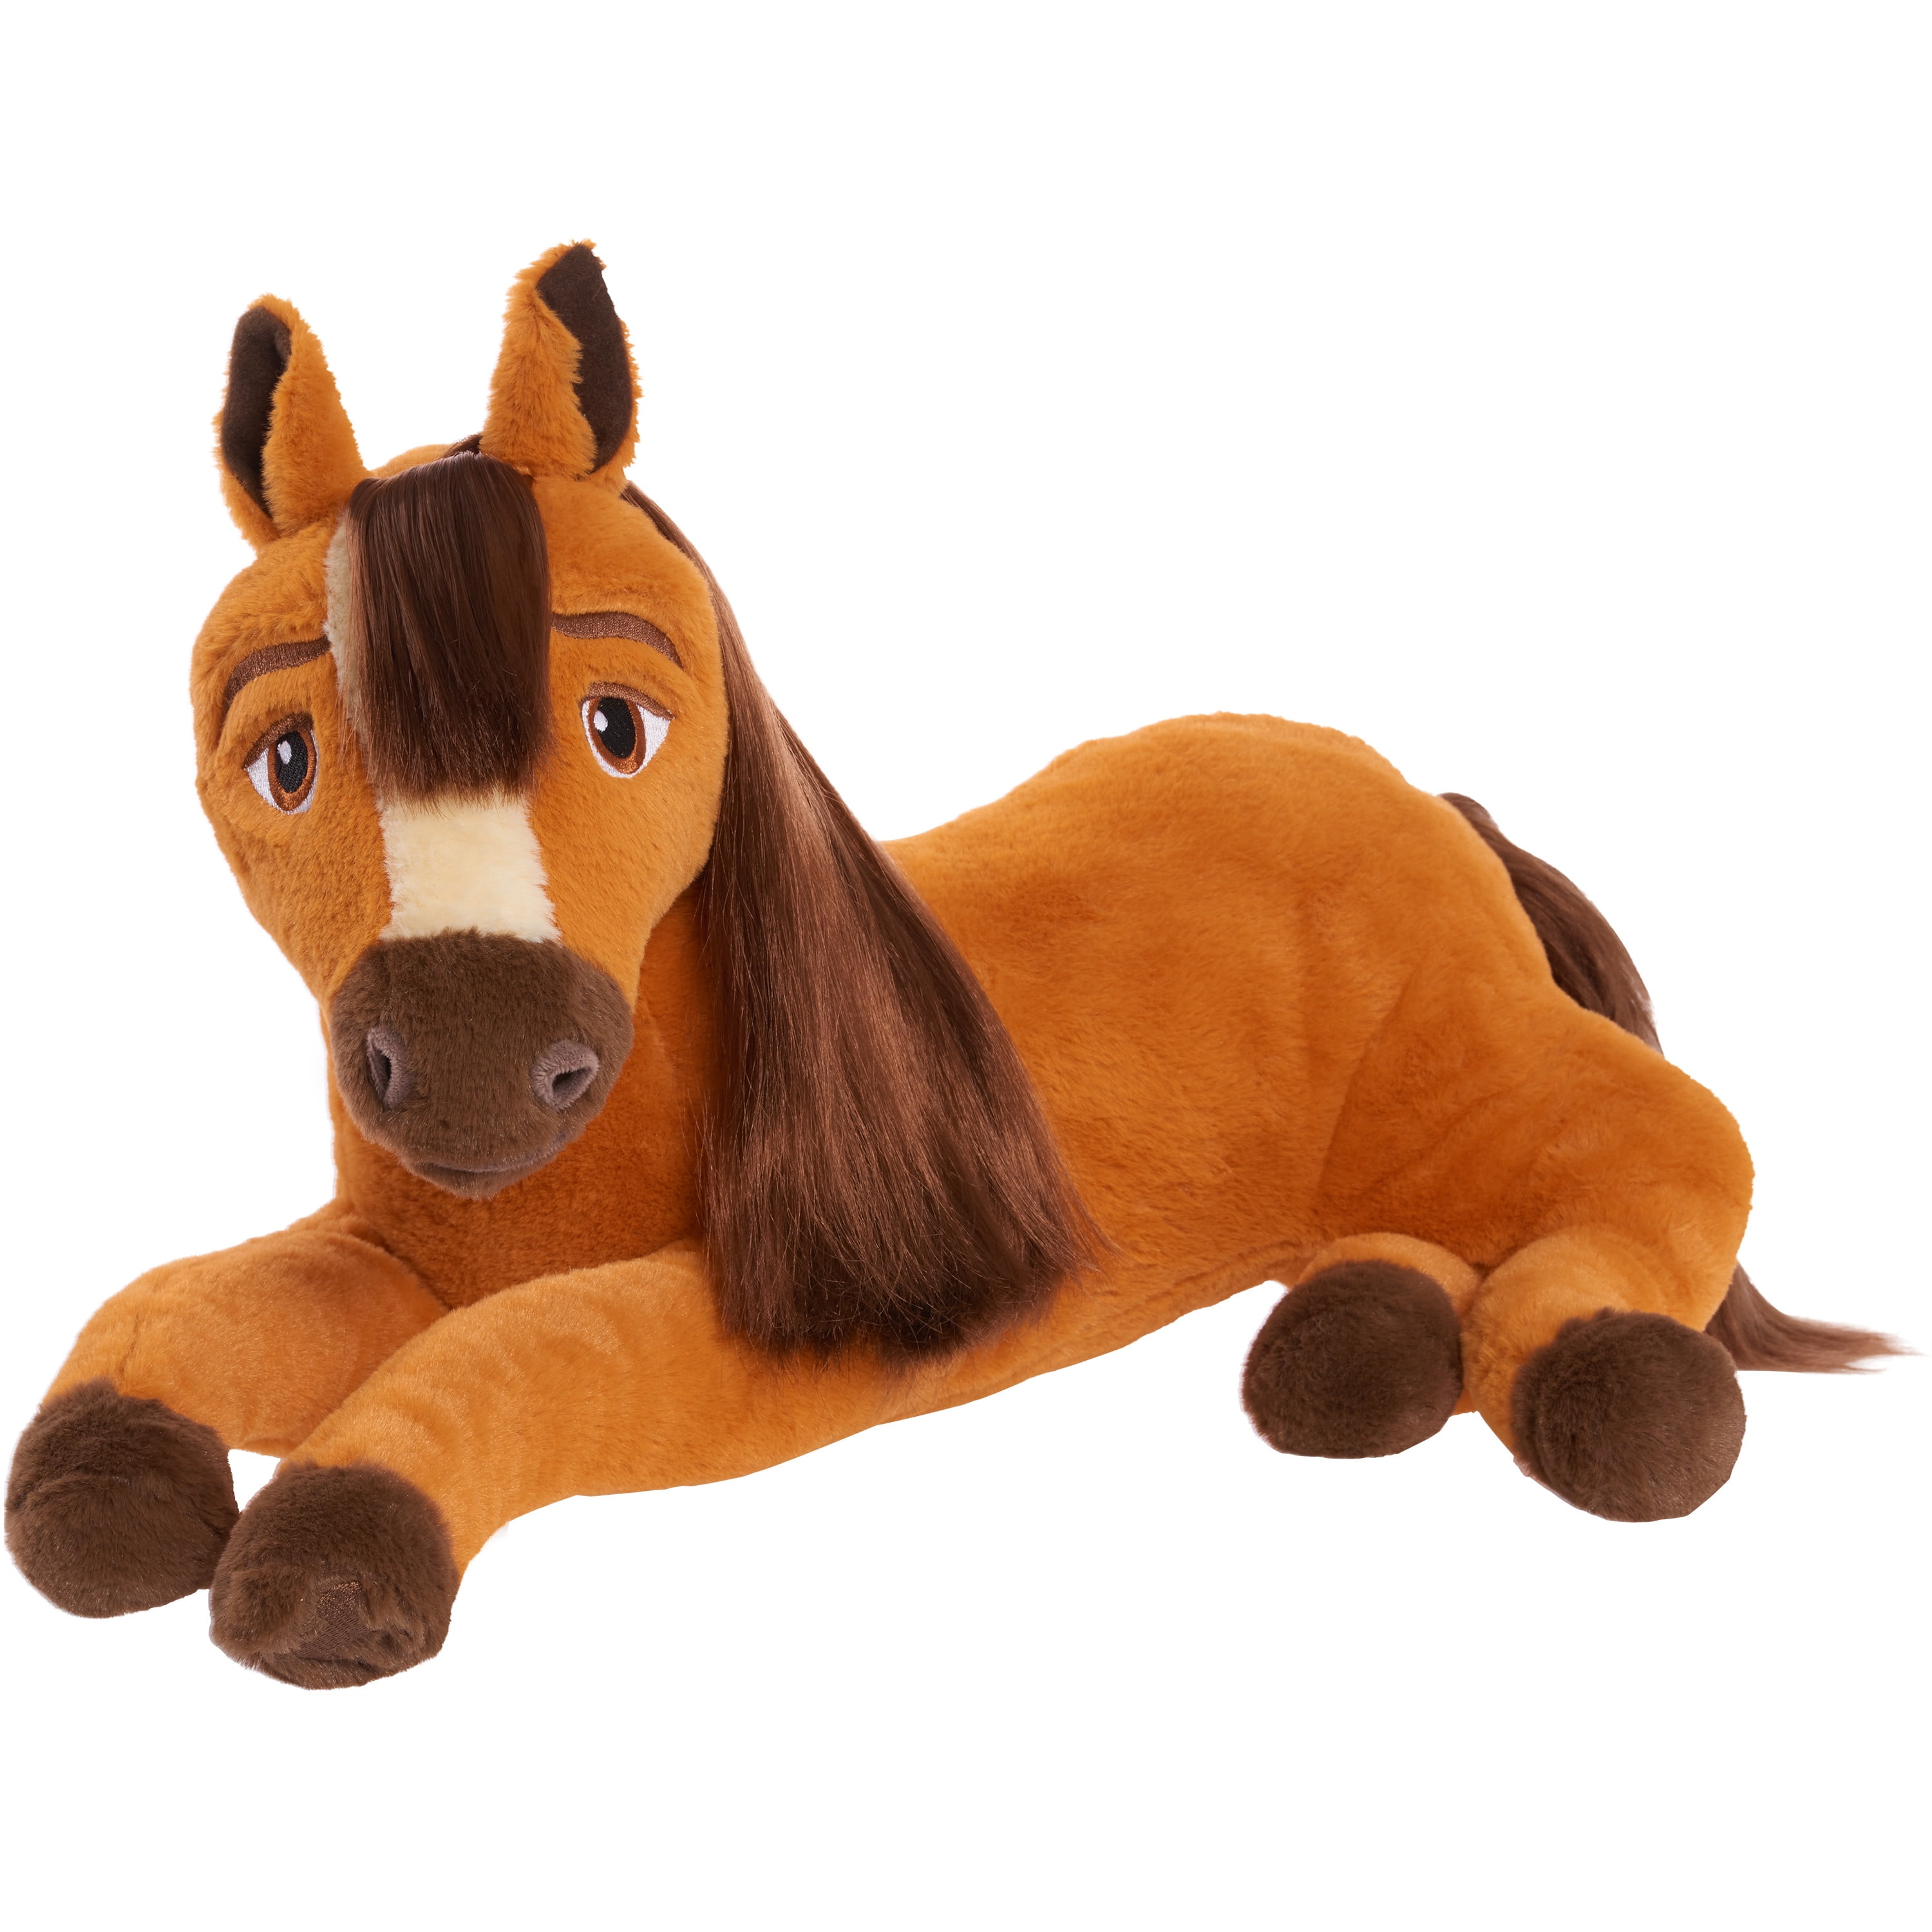 DreamWorks Spirit Riding Free Large Spirit Plush,  Inch Tall and 18  Inch Long, Stuffed Animal, Horse, Kids Toys for Ages 3 Up, Gifts and  Presents 